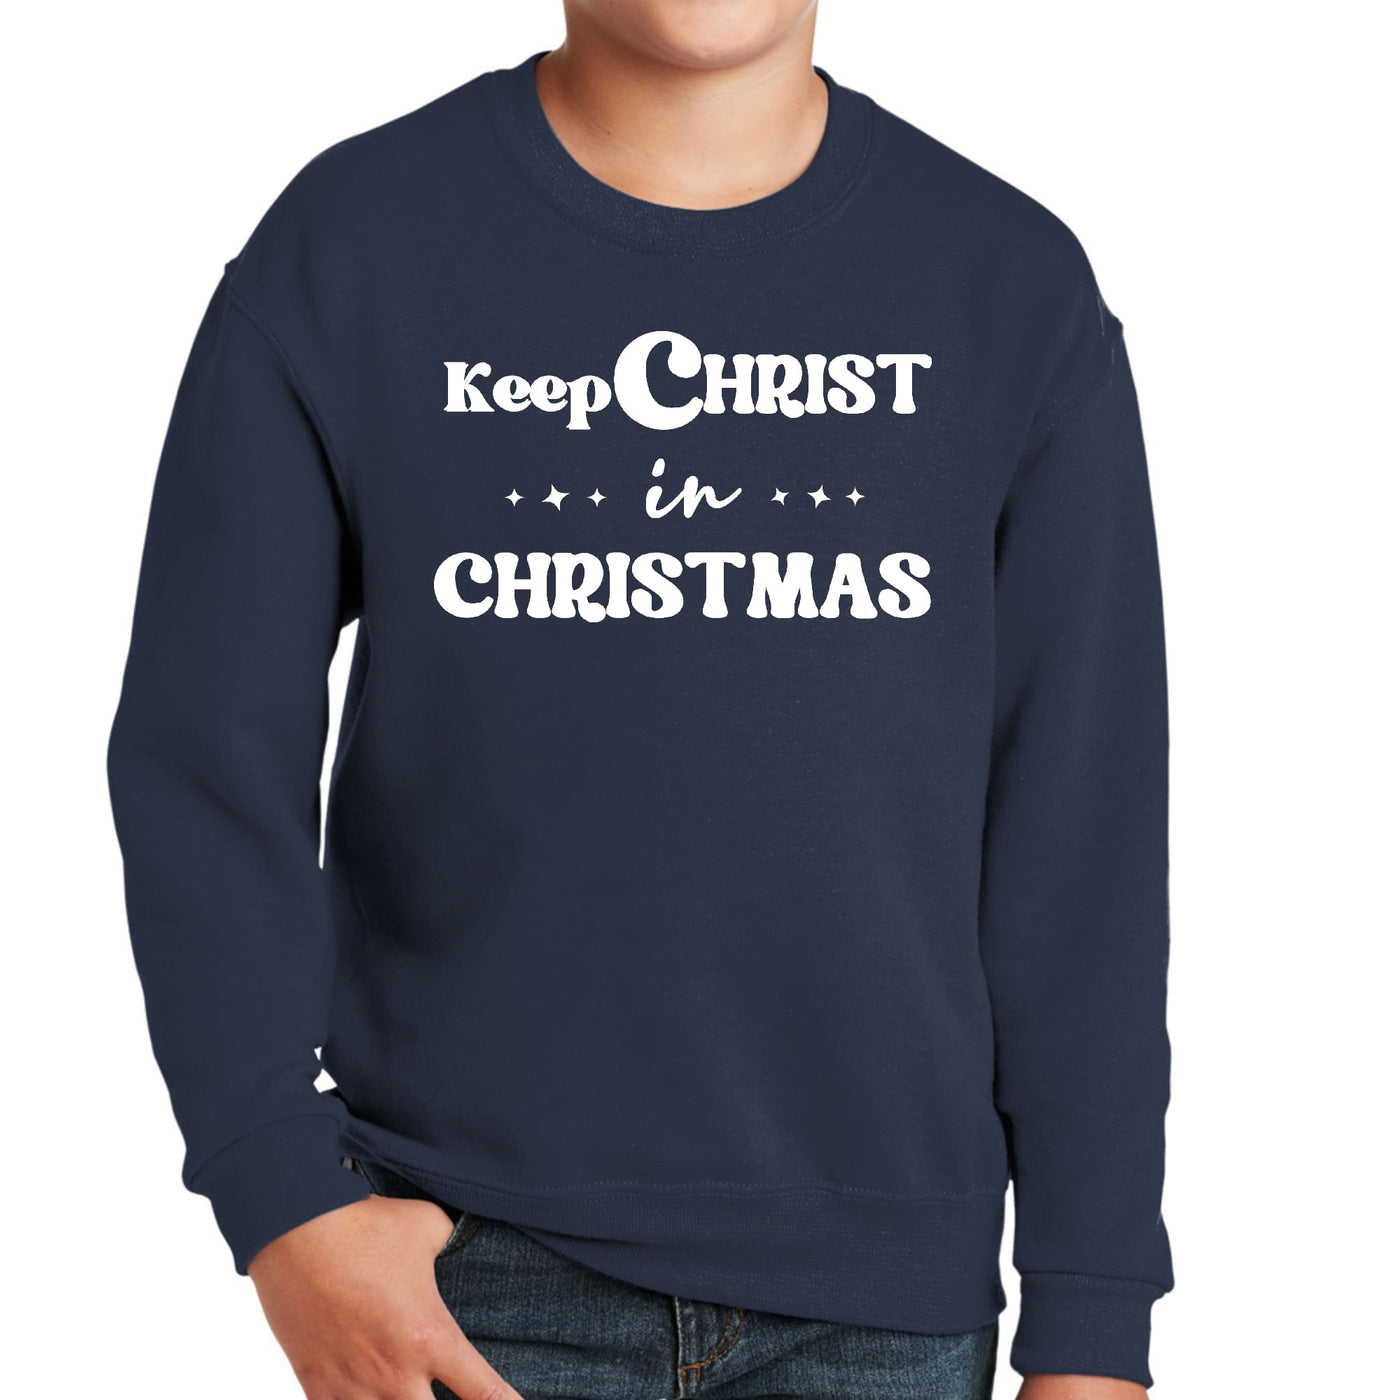 Youth Graphic Sweatshirt Keep Christ In Christmas Christian Holiday - Youth